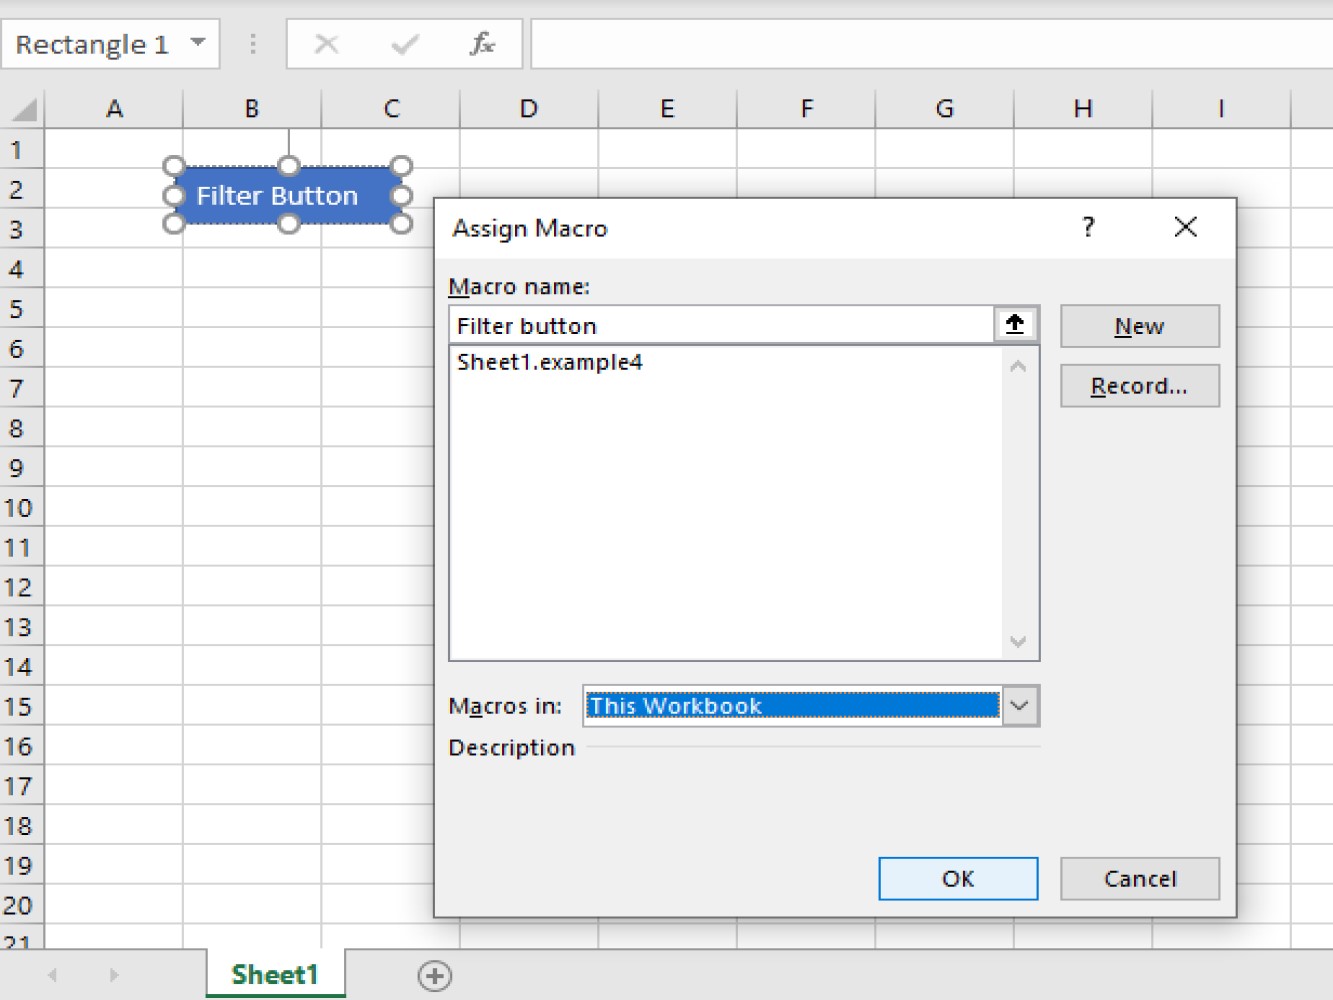 Screenshot for assigning macro on the shape button